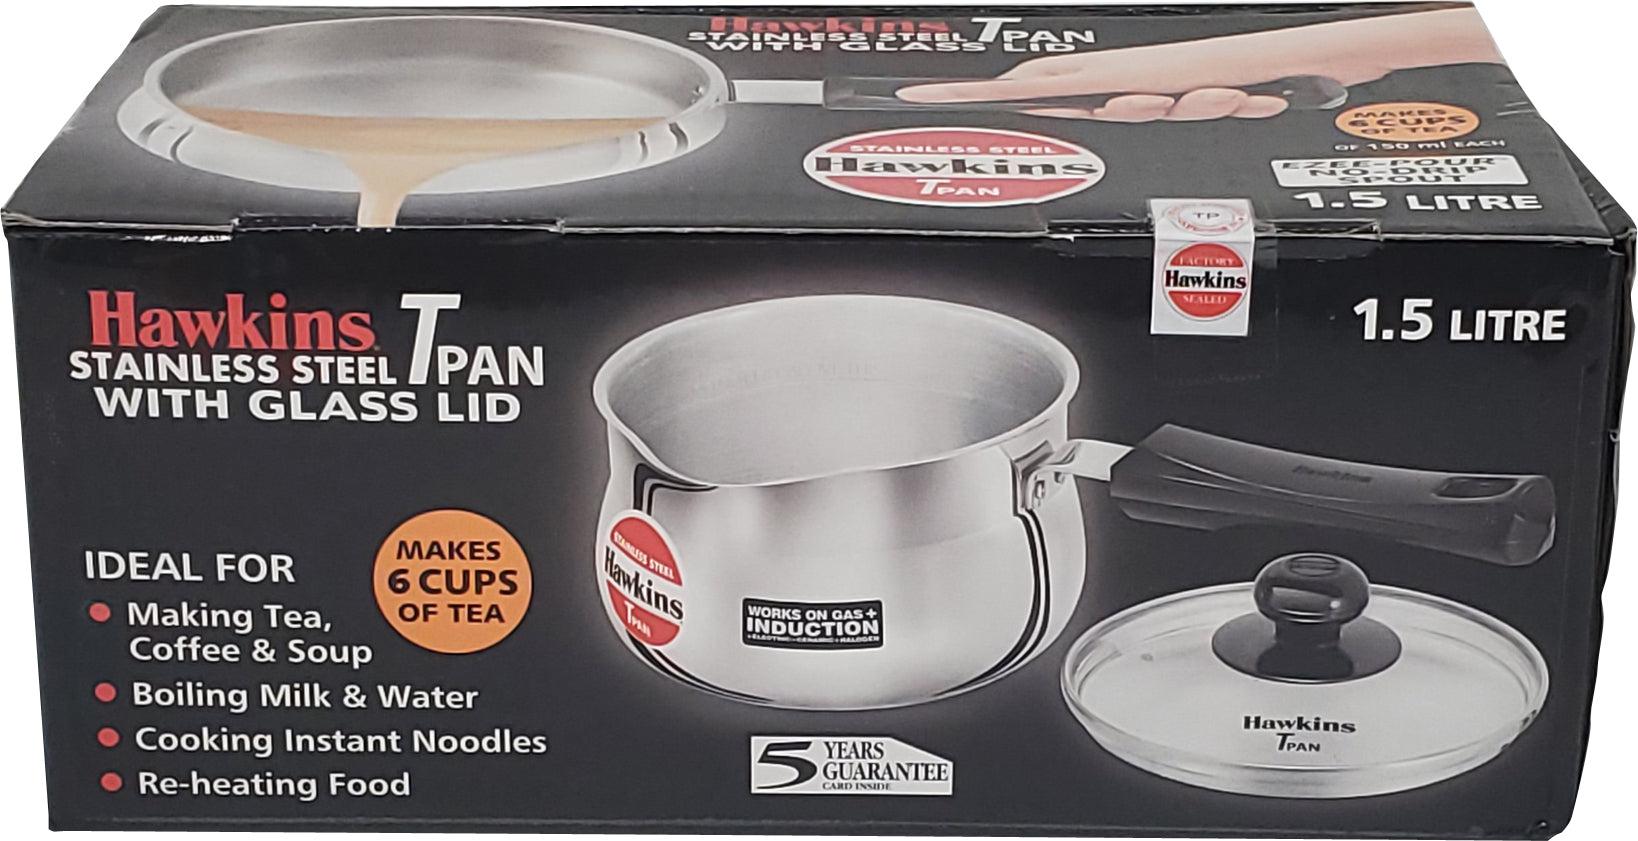 http://www.a1cashandcarry.com/cdn/shop/products/Hawkins-T-Pan-with-Lid-1_5L-Wares-Equipment-Hawkins-Hawkins-T-Pan-with-Lid-1_5L-Wares-Equipment-Hawkins-Hawkins-T-Pan-with-Lid-1_5L-Wares-Equipment-Hawkins-Hawkins-T-Pan-with-Lid-1_5L_35e44220-d2ae-4d76-851e-e15727d852a1.jpg?v=1697942422